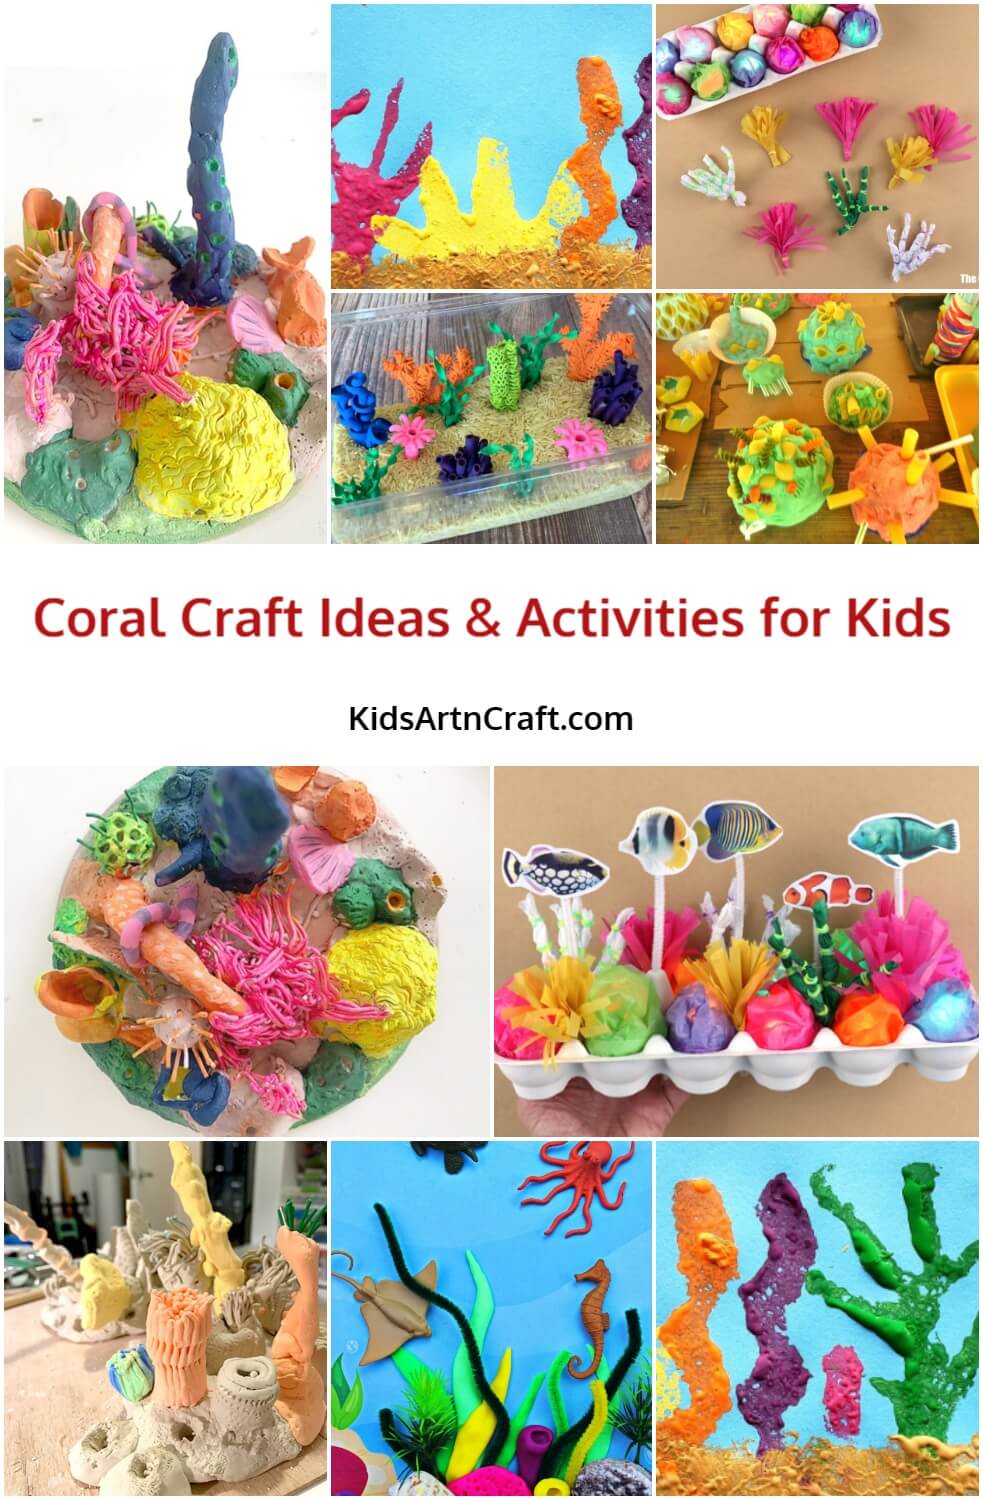 Coral Craft Ideas & Activities for Kids